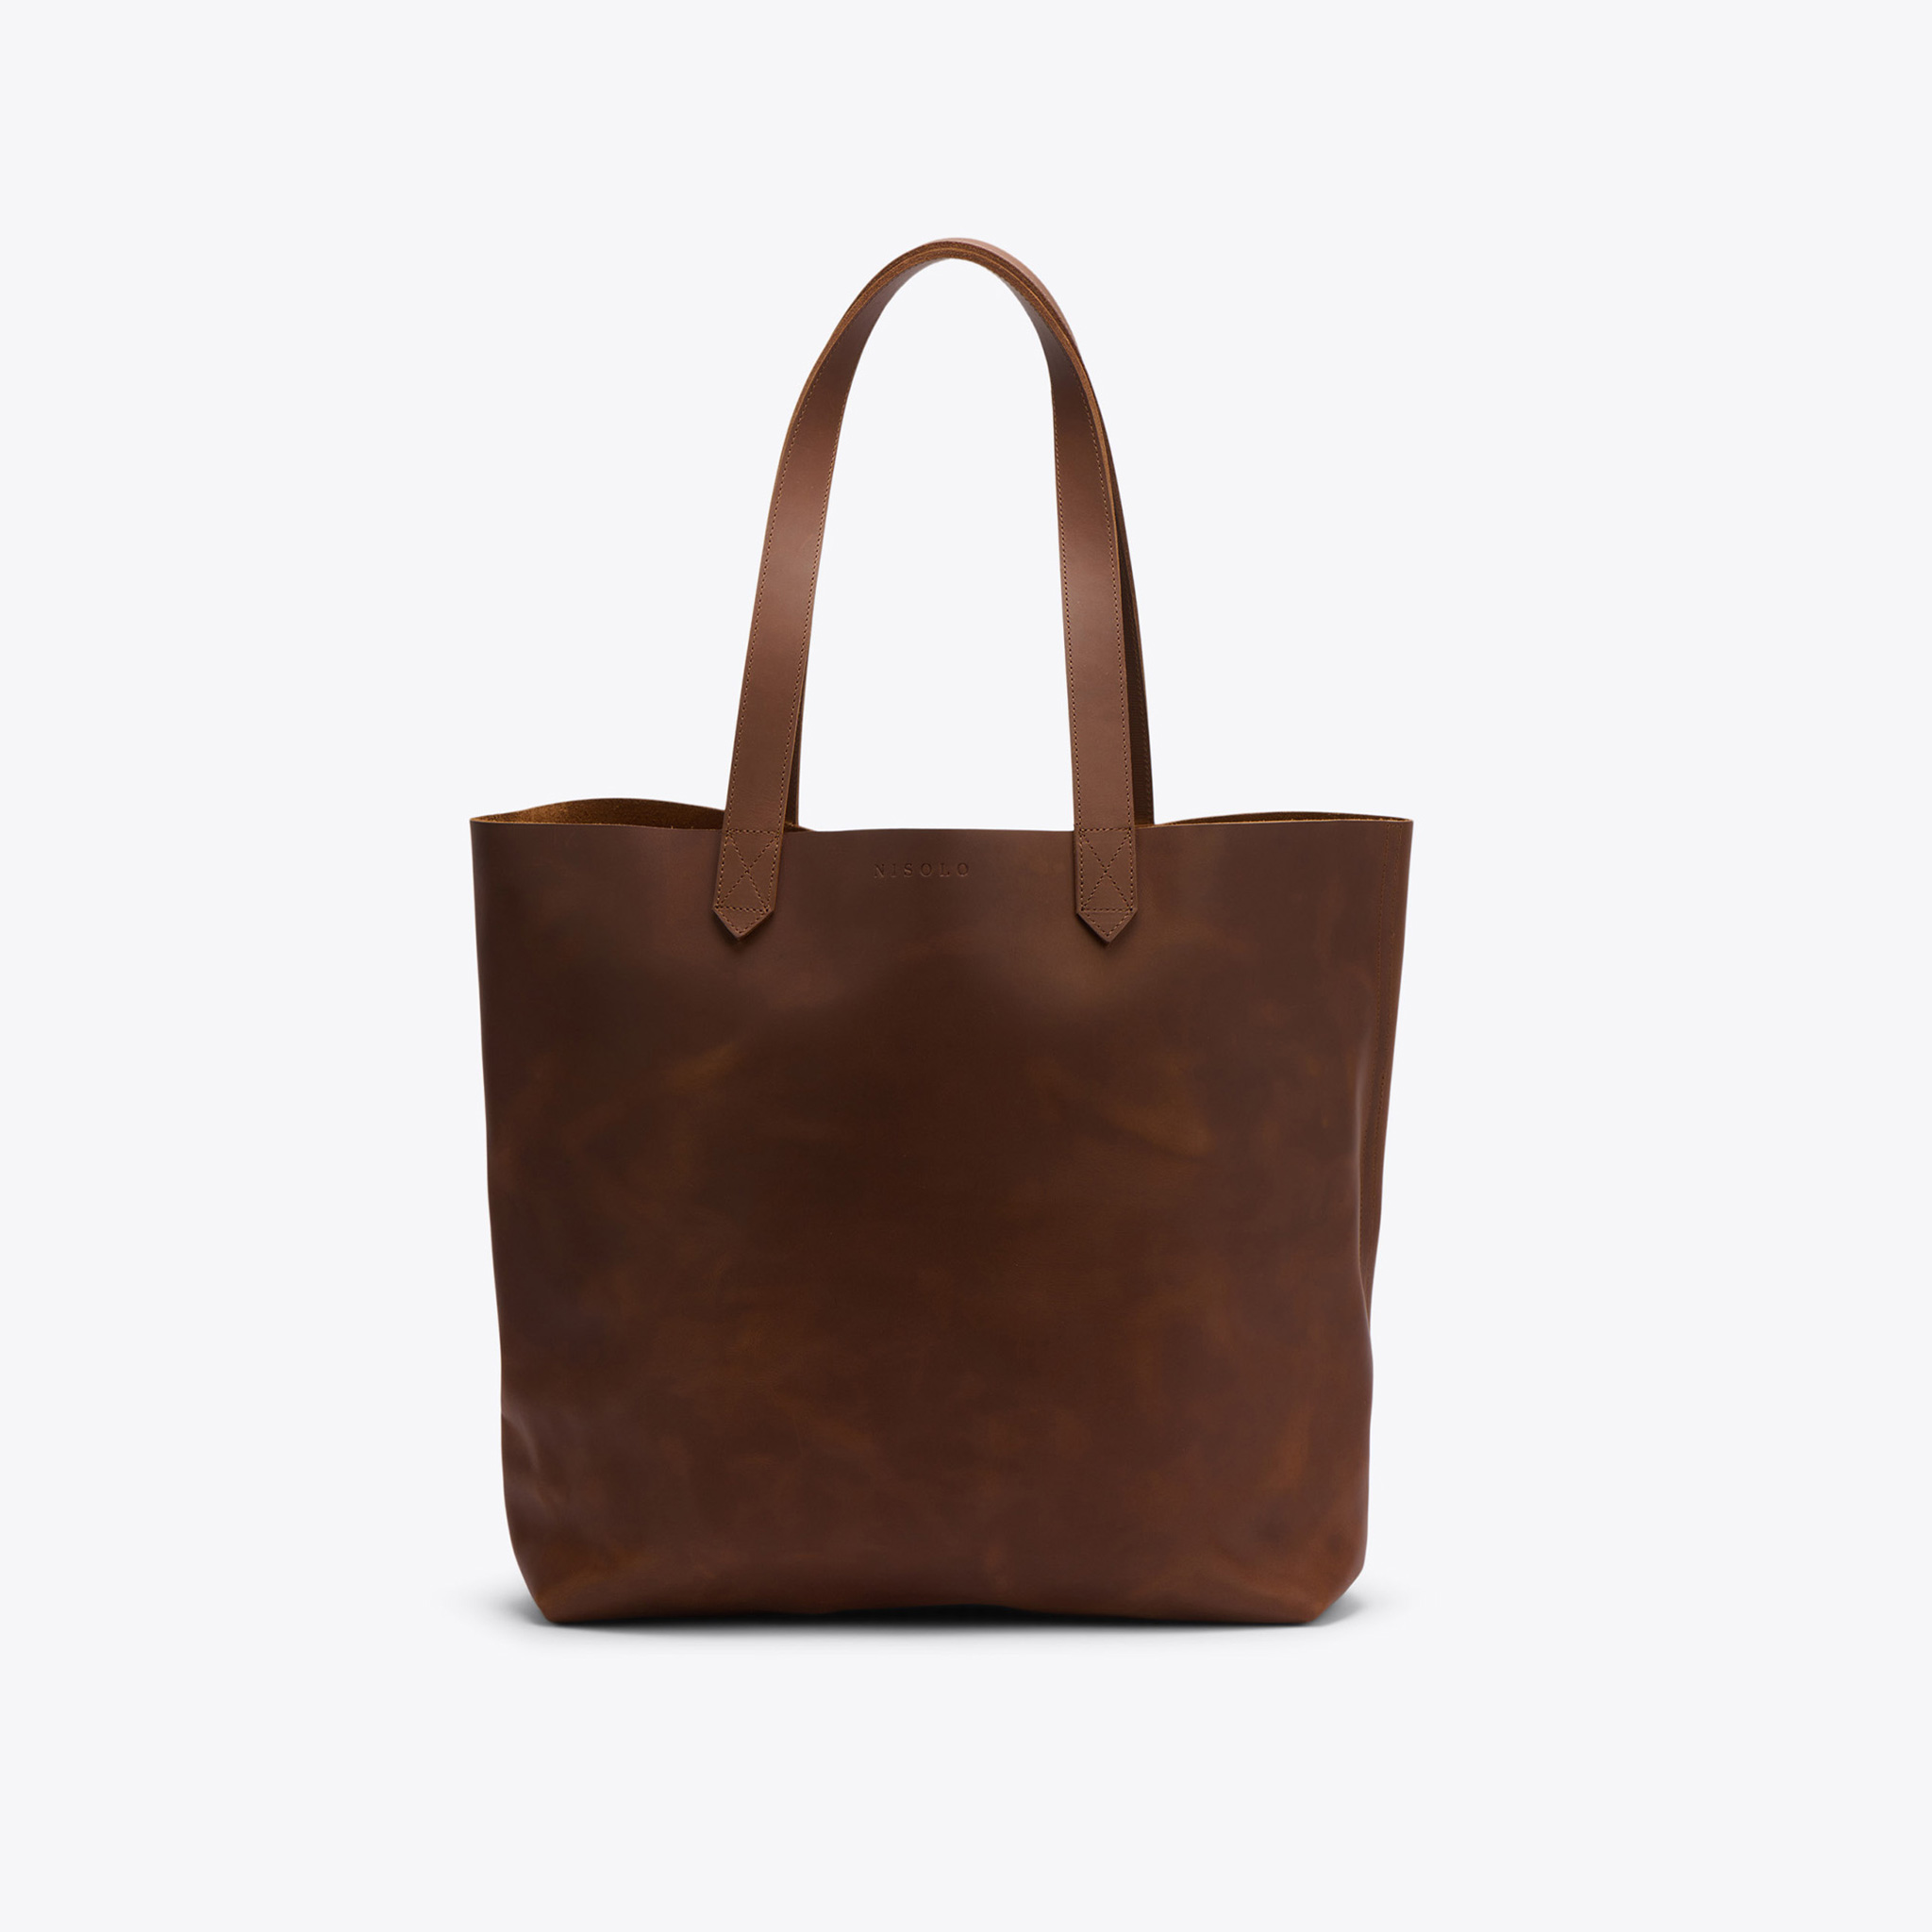 Nisolo Lori Tote Brown - Every Nisolo product is built on the foundation of comfort, function, and design. 